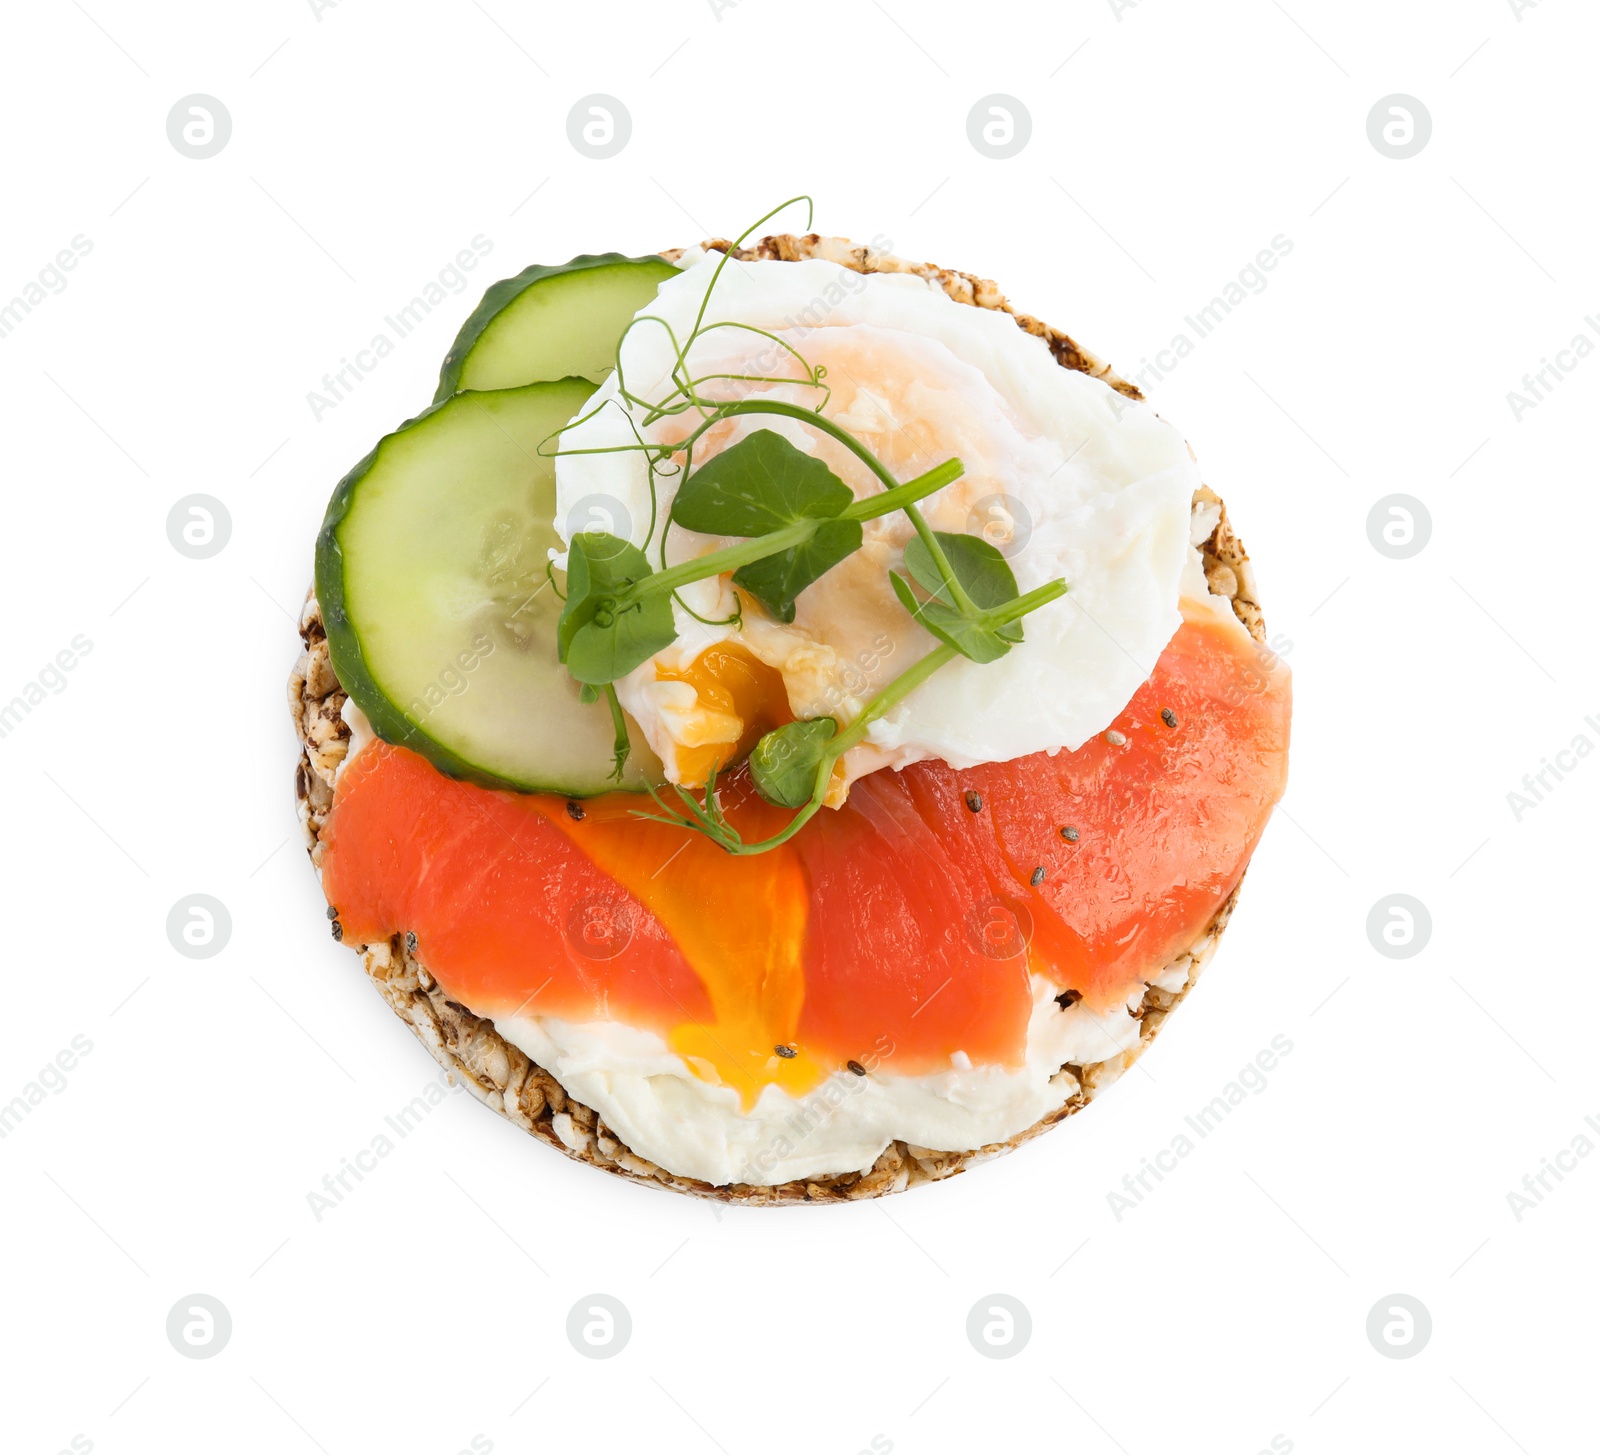 Photo of Crunchy buckwheat cake with salmon, poached egg and cucumber slices isolated on white